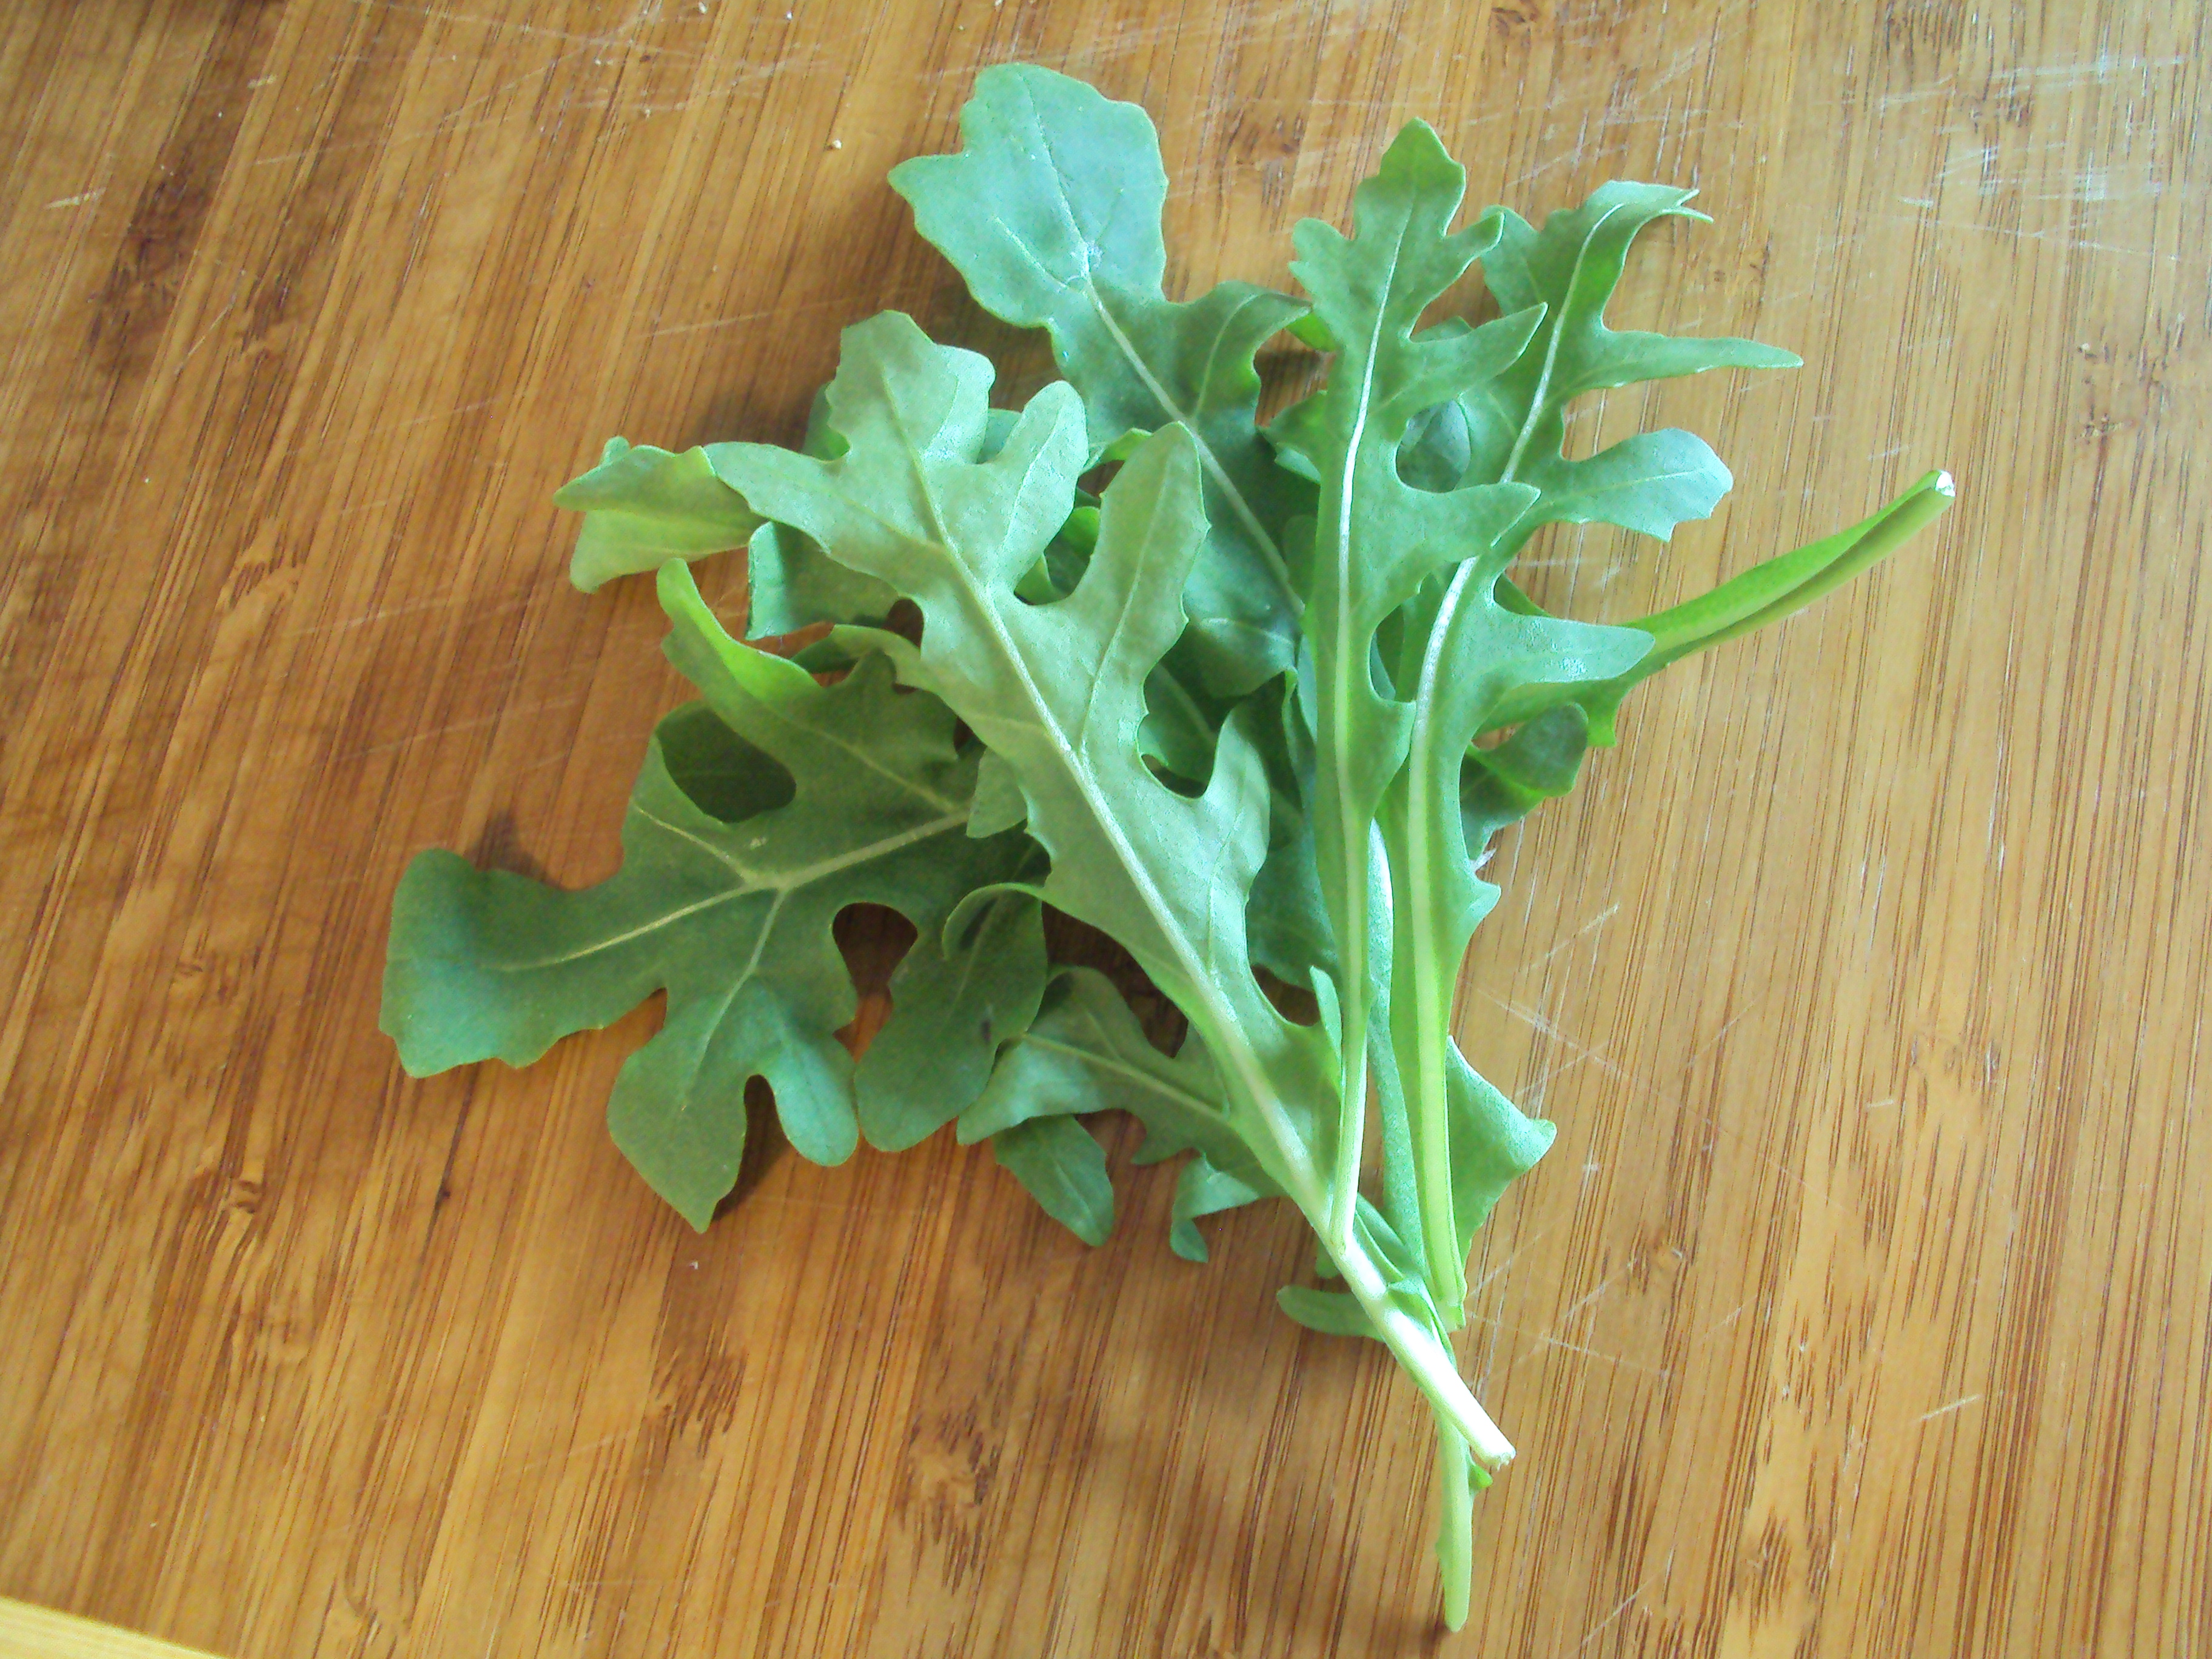  tasted ARUGULA before, it goes by several different names. ARUGULA ...